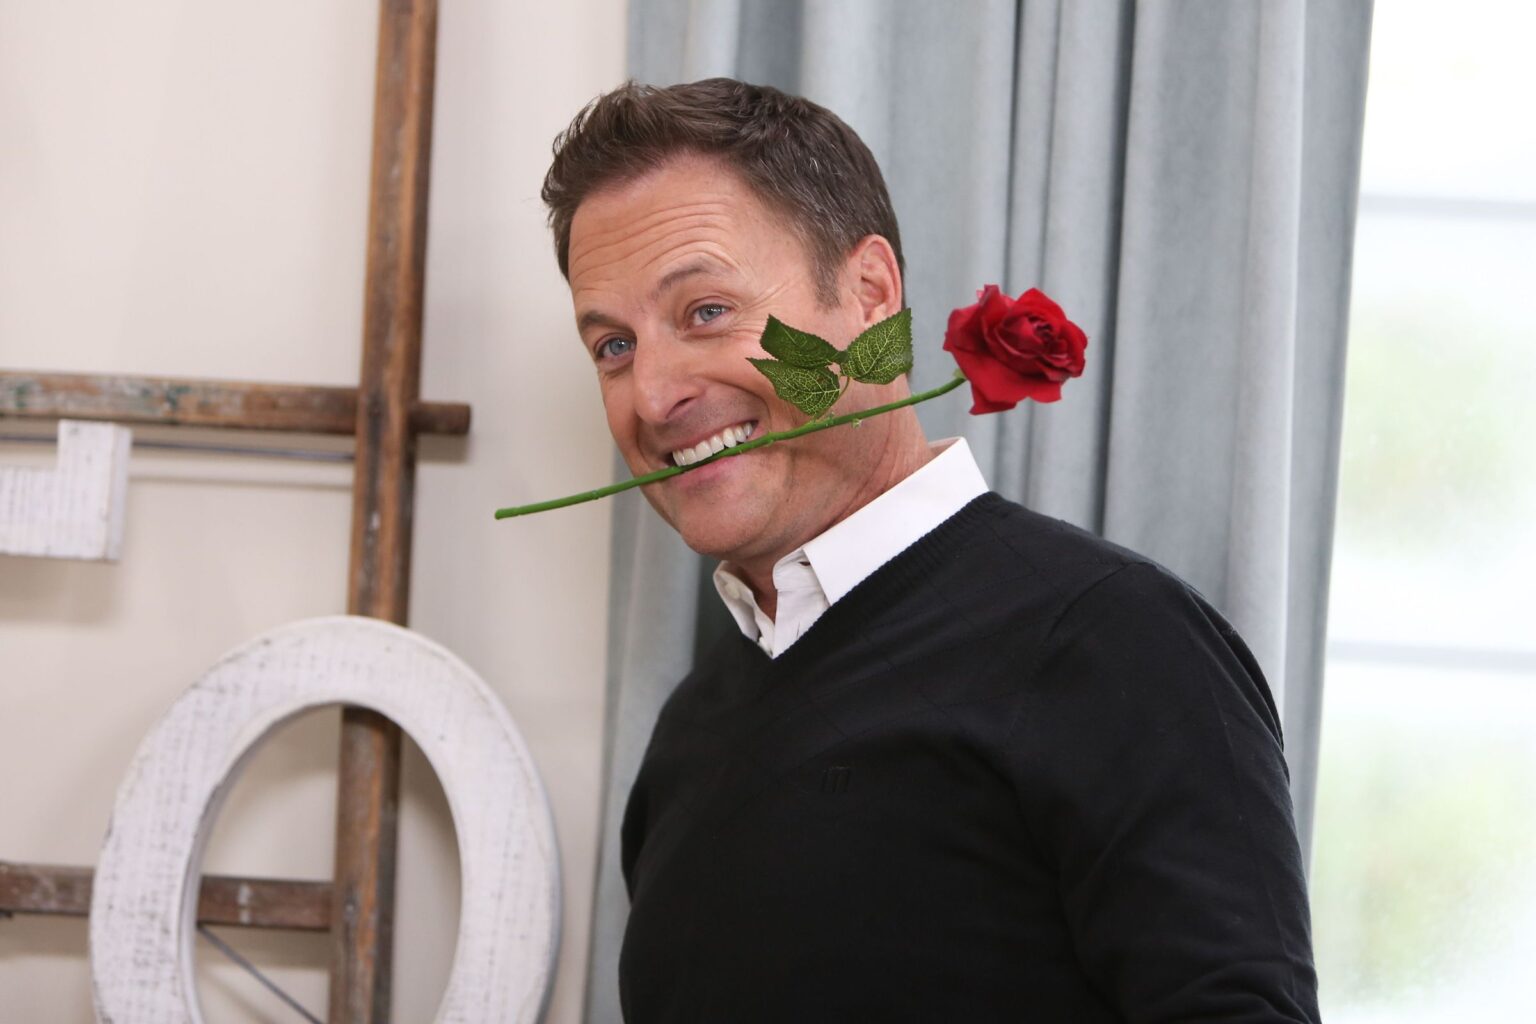 Chris Harrison has finally said goodbye to 'The Bachelor'. Does this mean his net worth is plummeting as we know it?